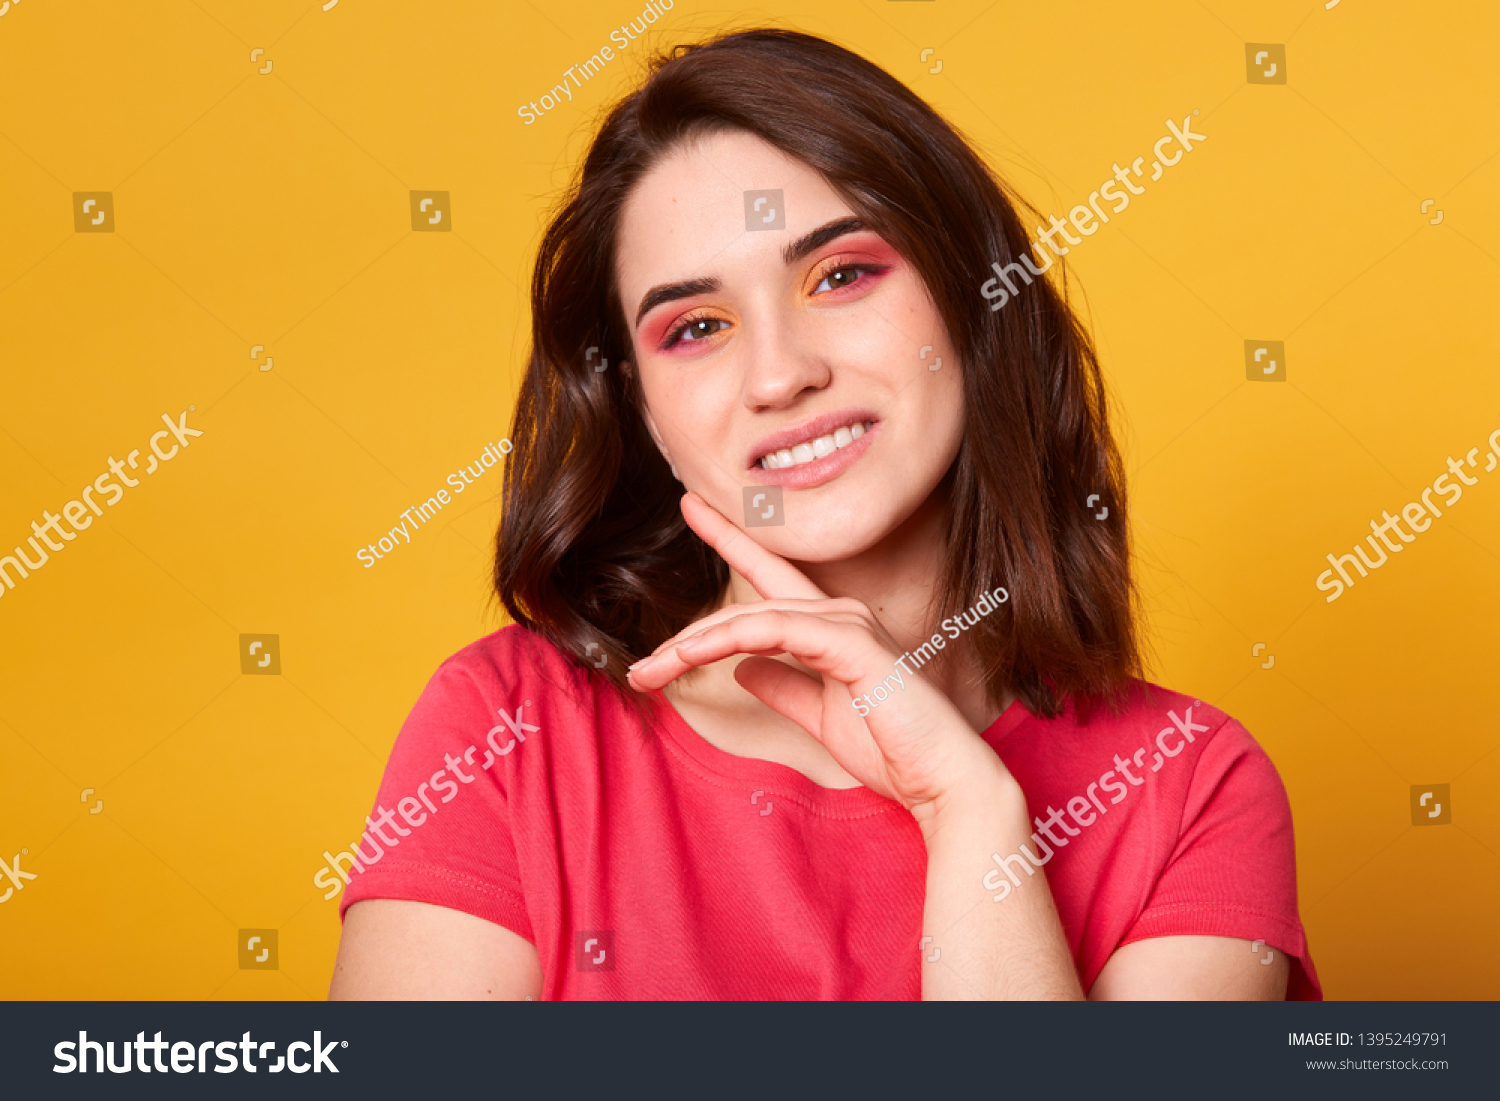 Indoor shot of beautiful brunette female with pink and orange colors makeup isolated over yellow background, looking at camera with pleasant smile, wearing casual red t shirt. Beauty concept. #1395249791